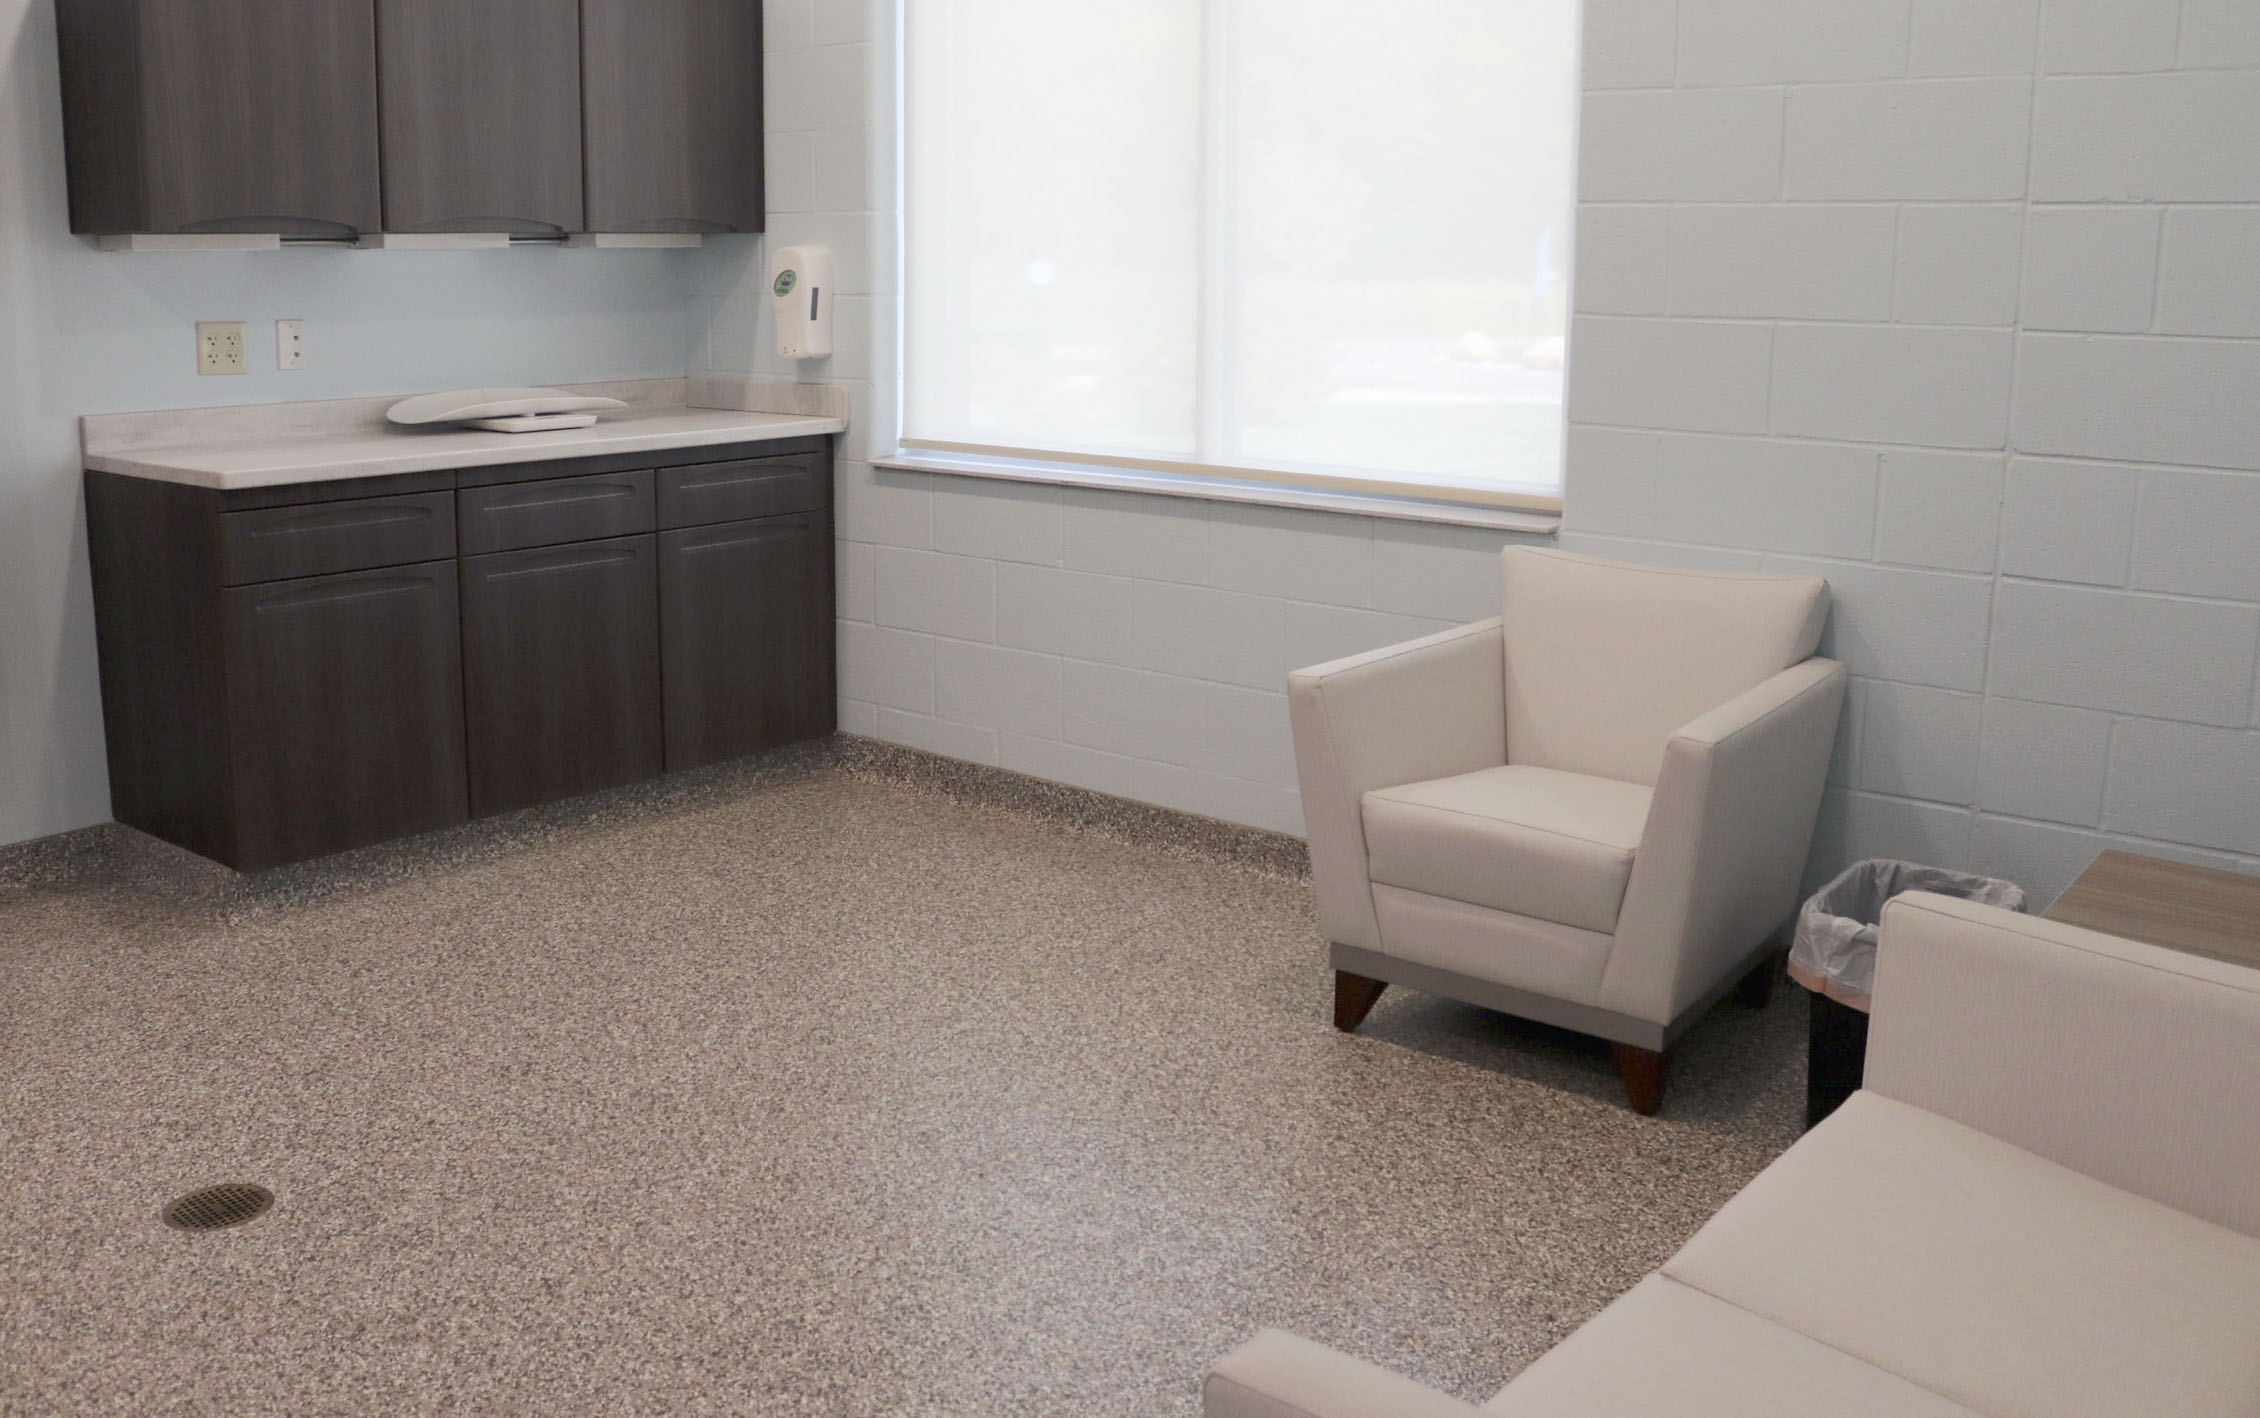 The guest isolation room rests on Tuesday, Aug. 23, 2022, at Charles and Lynn Zhang Animal Care & Resource Center in Kalamazoo. The guest isolation room is used for people who are putting an animal down to have a quiet place to wait, away from the public lobby.